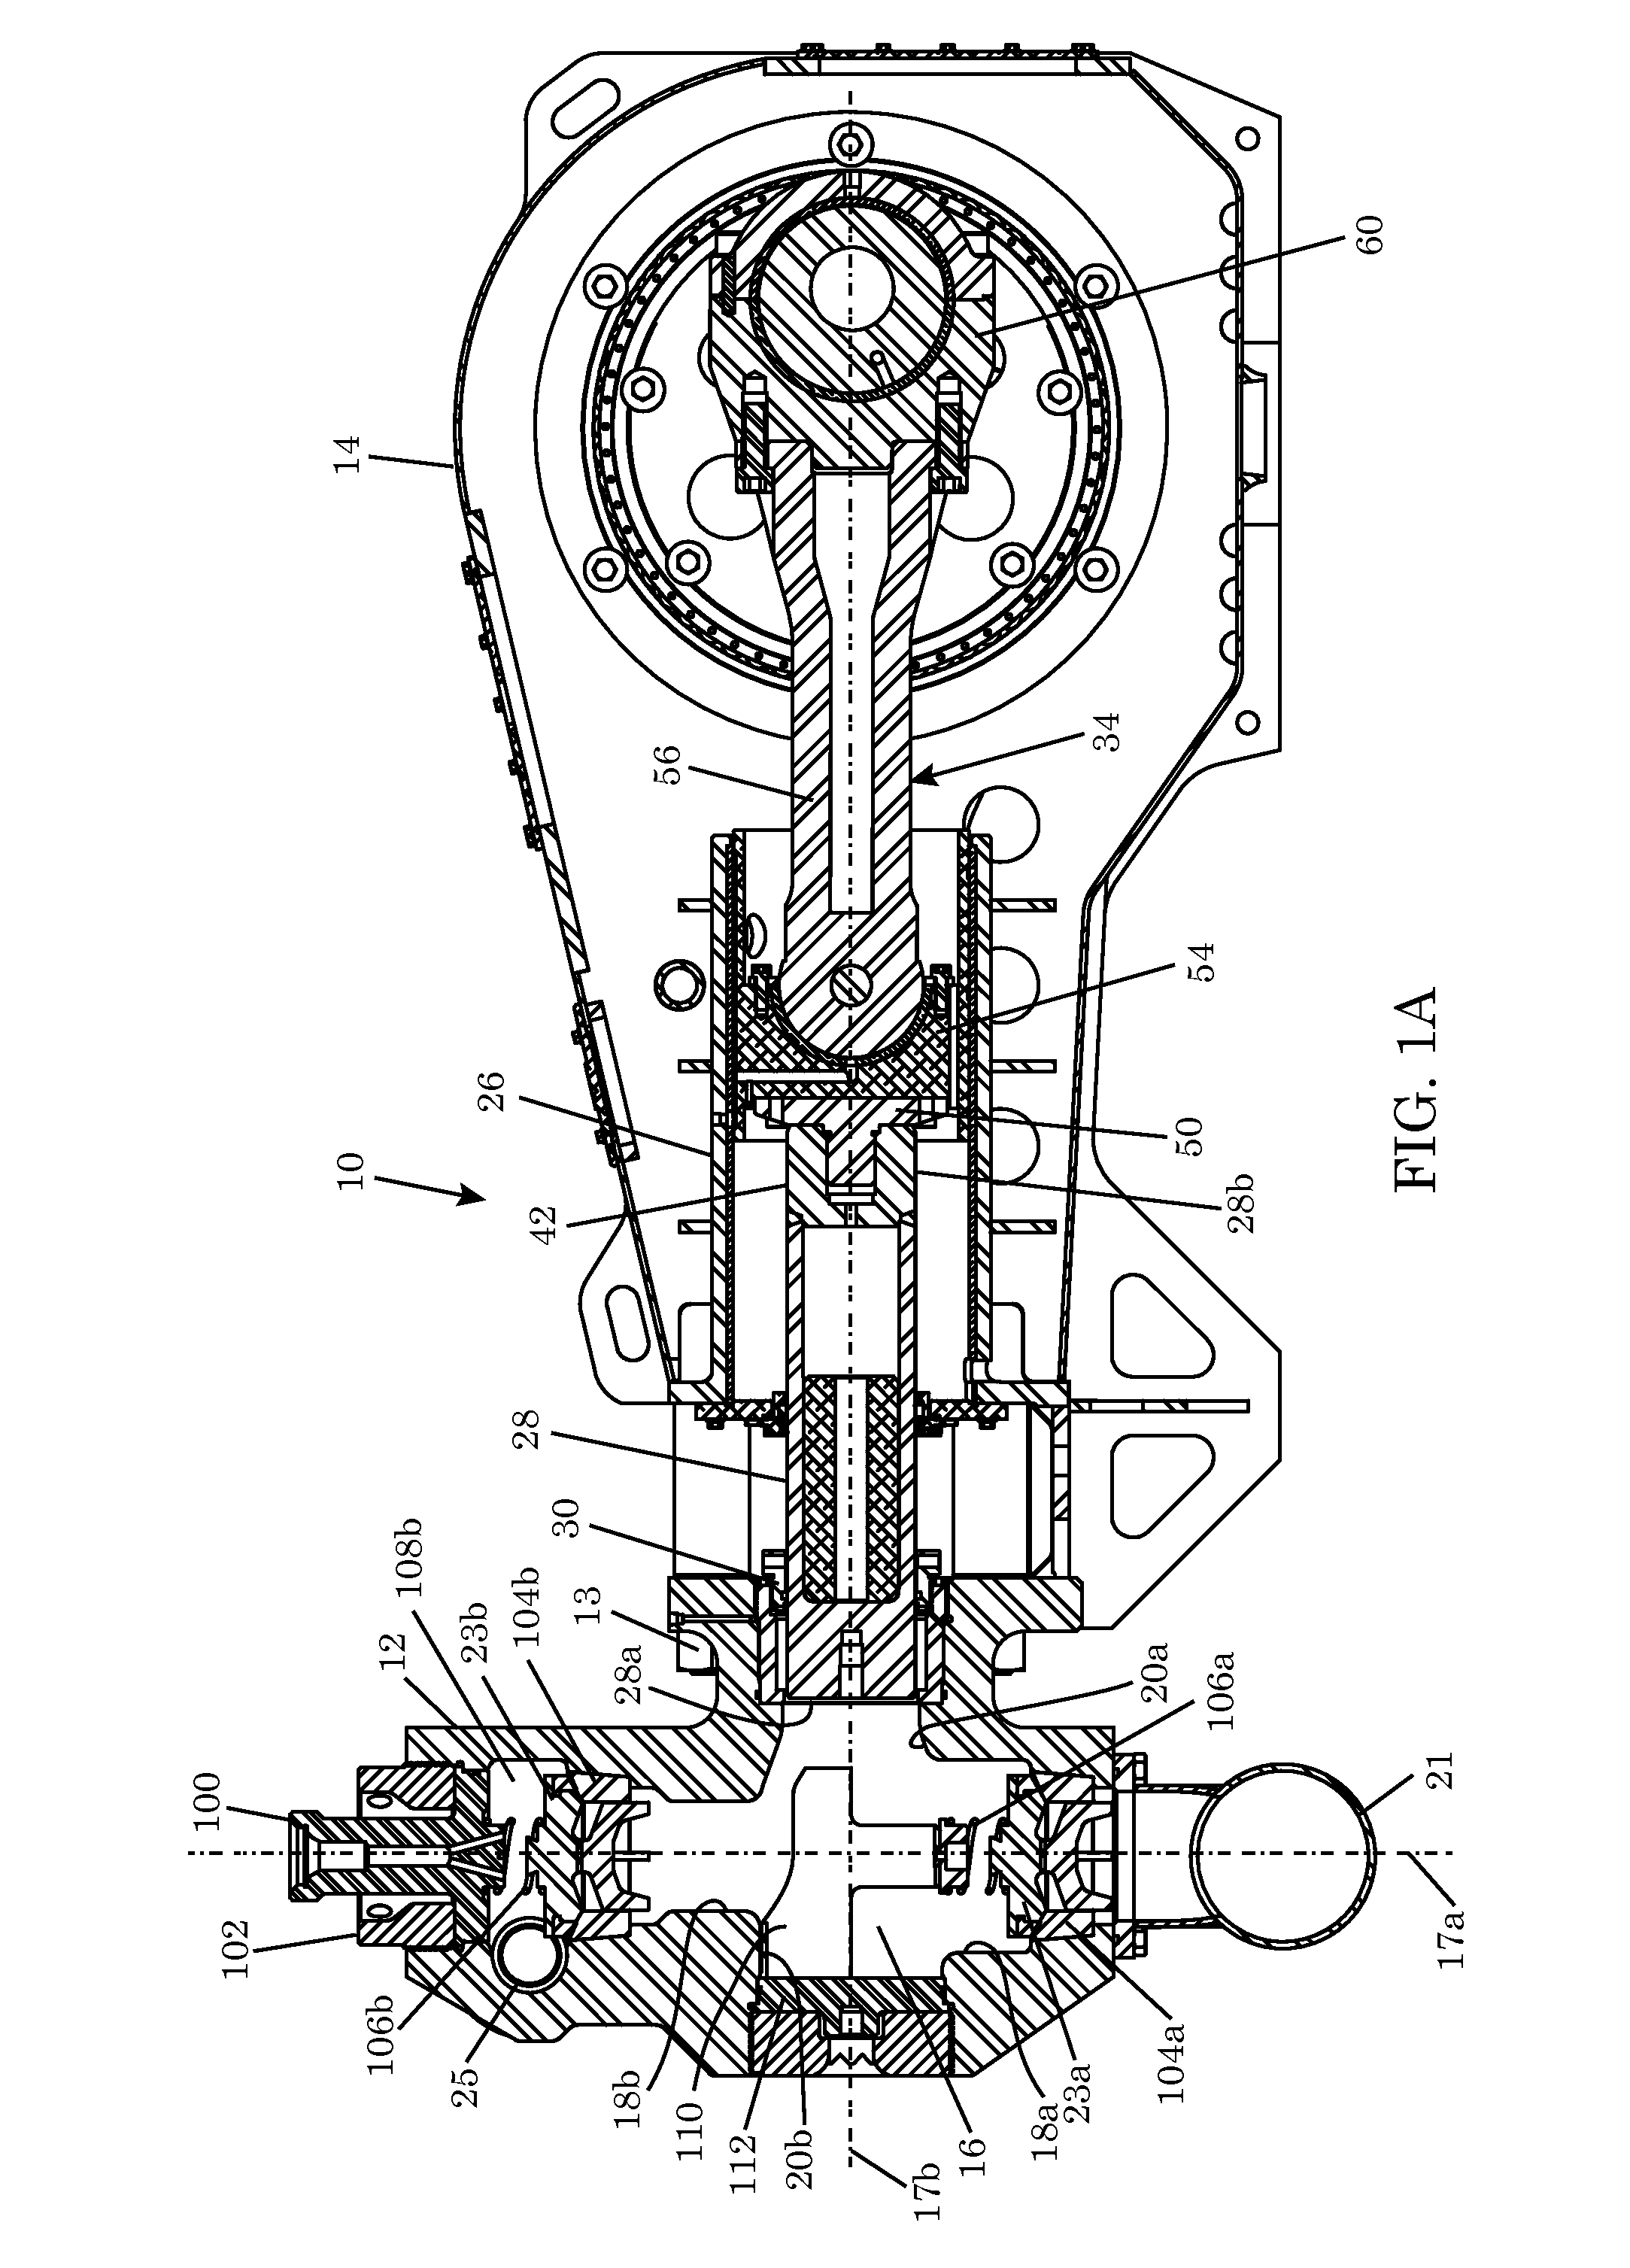 Plunger Pump, Plunger, and Method of Manufacturing Plunger Pump